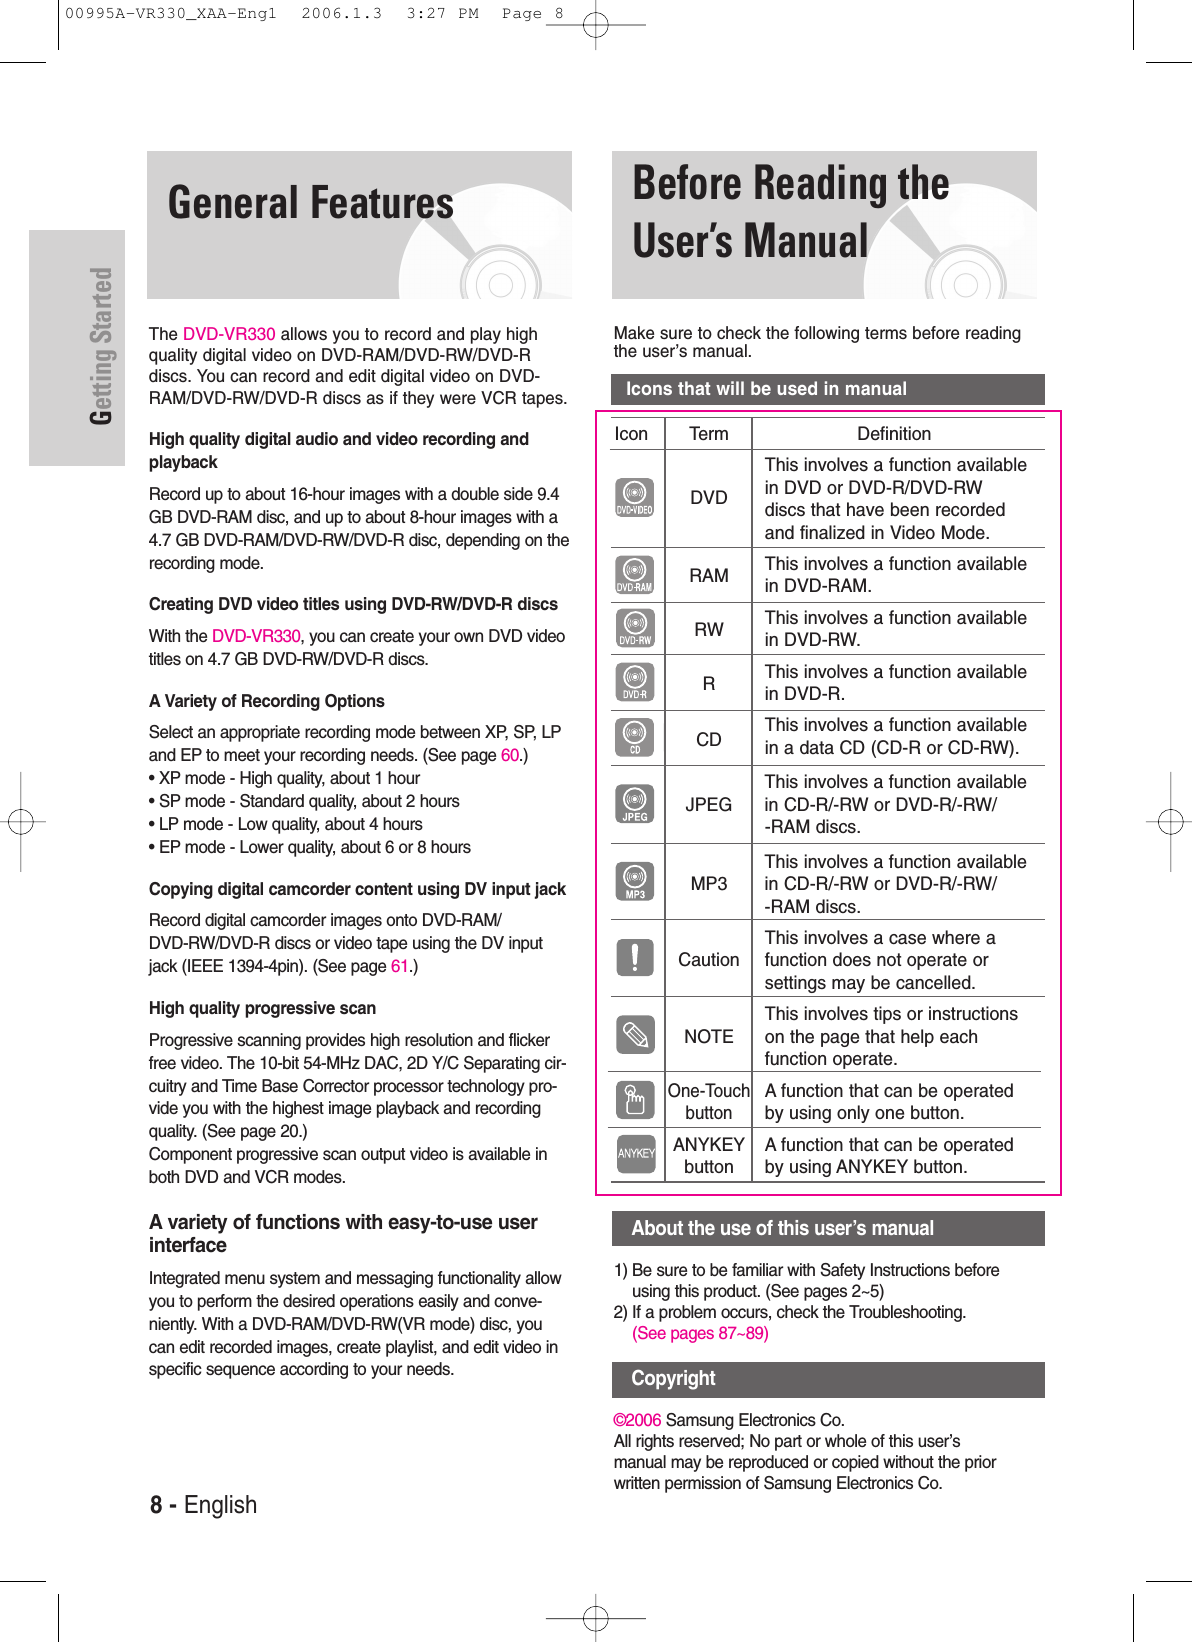 Getting Started8- EnglishBefore Reading theUser’s ManualAbout the use of this user’s manual1) Be sure to be familiar with Safety Instructions beforeusing this product. (See pages 2~5)2) If a problem occurs, check the Troubleshooting. (See pages 87~89)©2006 Samsung Electronics Co.All rights reserved; No part or whole of this user’smanual may be reproduced or copied without the priorwritten permission of Samsung Electronics Co.Make sure to check the following terms before readingthe user’s manual.General FeaturesThe DVD-VR330 allows you to record and play highquality digital video on DVD-RAM/DVD-RW/DVD-Rdiscs. You can record and edit digital video on DVD-RAM/DVD-RW/DVD-R discs as if they were VCR tapes. High quality digital audio and video recording and playbackRecord up to about 16-hour images with a double side 9.4GB DVD-RAM disc, and up to about 8-hour images with a4.7 GB DVD-RAM/DVD-RW/DVD-R disc, depending on therecording mode.Creating DVD video titles using DVD-RW/DVD-R discsWith the DVD-VR330, you can create your own DVD videotitles on 4.7 GB DVD-RW/DVD-R discs.A Variety of Recording OptionsSelect an appropriate recording mode between XP, SP, LPand EP to meet your recording needs. (See page 60.) • XP mode - High quality, about 1 hour• SP mode - Standard quality, about 2 hours• LP mode - Low quality, about 4 hours• EP mode - Lower quality, about 6 or 8 hoursCopying digital camcorder content using DV input jackRecord digital camcorder images onto DVD-RAM/DVD-RW/DVD-R discs or video tape using the DV inputjack (IEEE 1394-4pin). (See page 61.)High quality progressive scanProgressive scanning provides high resolution and flickerfree video. The 10-bit 54-MHz DAC, 2D Y/C Separating cir-cuitry and Time Base Corrector processor technology pro-vide you with the highest image playback and recordingquality. (See page 20.)Component progressive scan output video is available inboth DVD and VCR modes. A variety of functions with easy-to-use userinterfaceIntegrated menu system and messaging functionality allowyou to perform the desired operations easily and conve-niently. With a DVD-RAM/DVD-RW(VR mode) disc, youcan edit recorded images, create playlist, and edit video inspecific sequence according to your needs.CopyrightIcons that will be used in manualIcon Term DefinitionThis involves a function available DVD in DVD or DVD-R/DVD-RW discs that have been recorded and finalized in Video Mode.This involves a function available RAM in DVD-RAM.This involves a function available RW in DVD-RW.This involves a function available Rin DVD-R.CD This involves a function available in a data CD (CD-R or CD-RW).This involves a function availableJPEG in CD-R/-RW or DVD-R/-RW/-RAM discs. This involves a function availableMP3 in CD-R/-RW or DVD-R/-RW/-RAM discs. This involves a case where a Caution function does not operate or settings may be cancelled.This involves tips or instructions NOTE on the page that help eachfunction operate.  One-TouchA function that can be operatedbuttonby using only one button.ANYKEY A function that can be operated button by using ANYKEY button.00995A-VR330_XAA-Eng1  2006.1.3  3:27 PM  Page 8